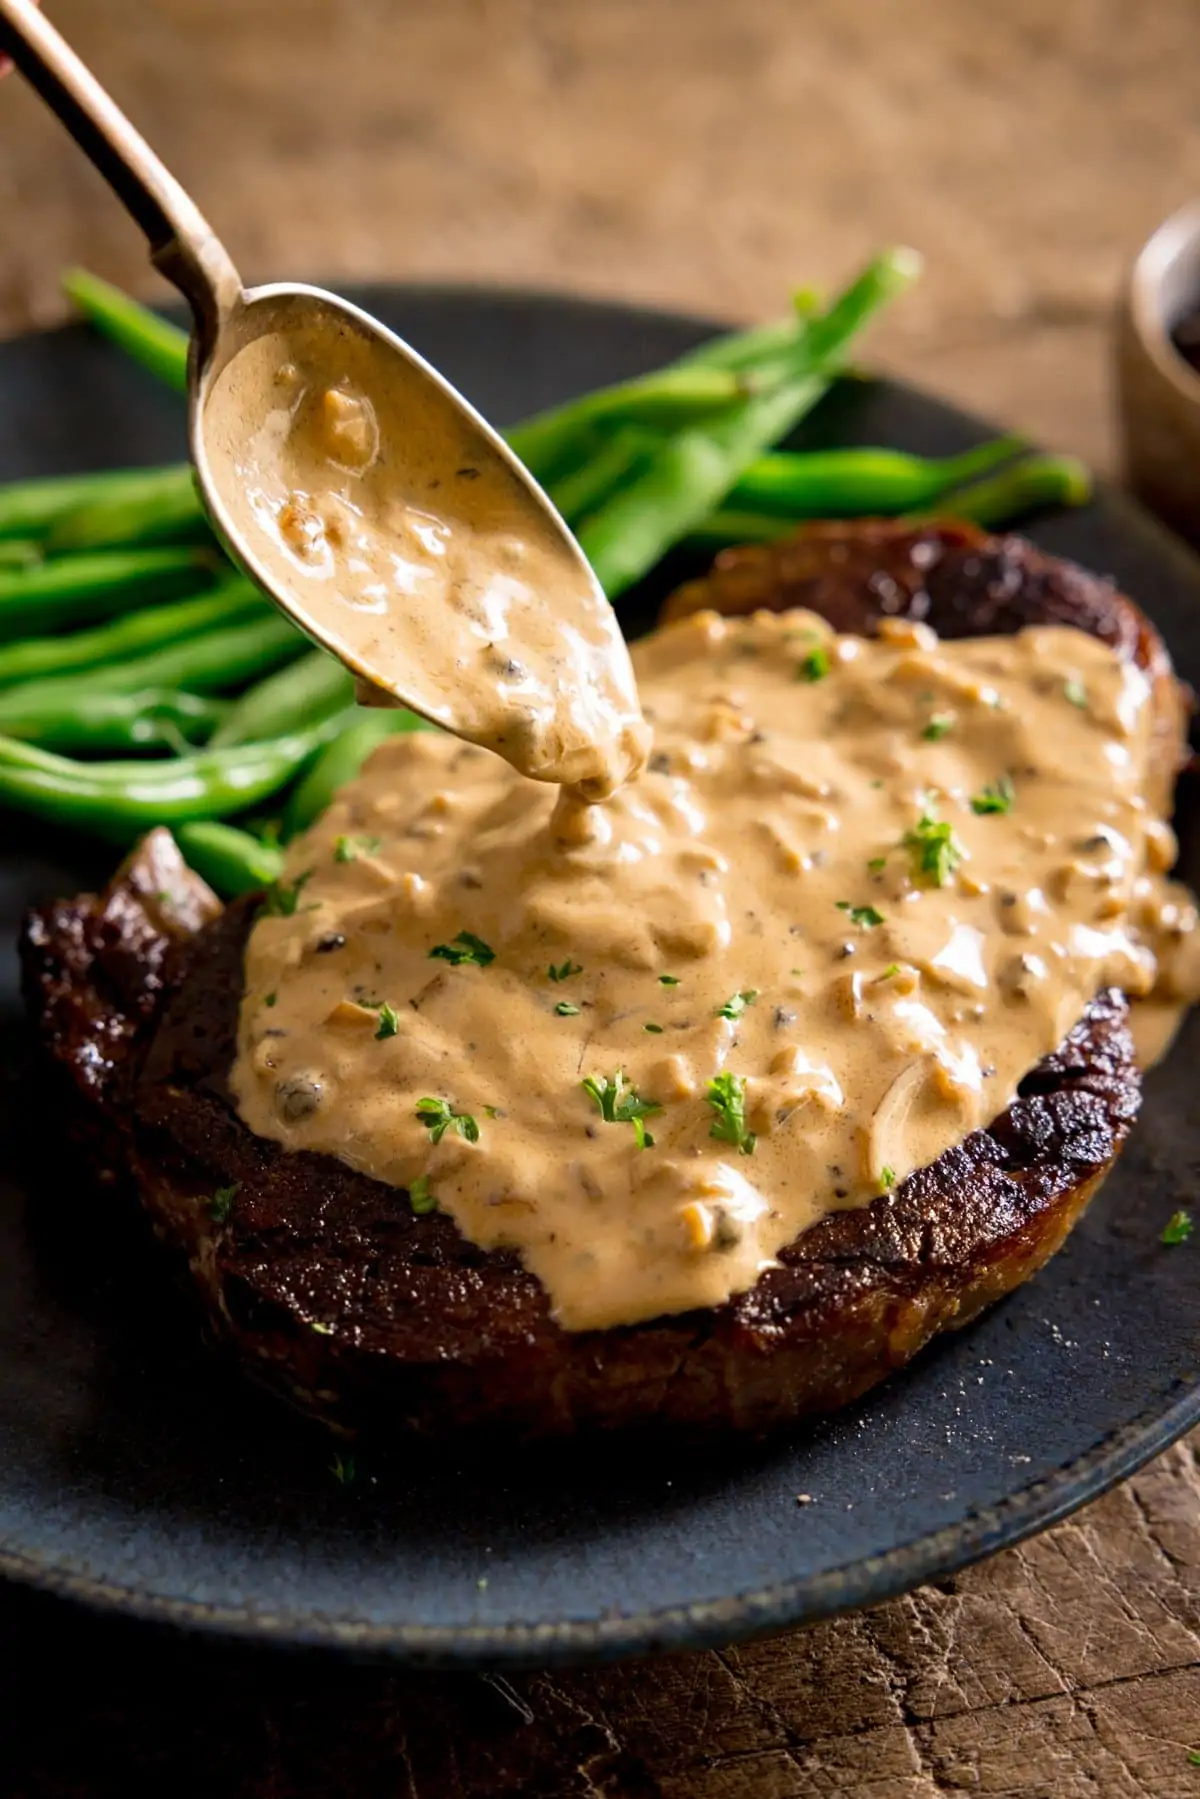 Peppercorn sauce being spooned over a cooked steak on a blue plate with green beans